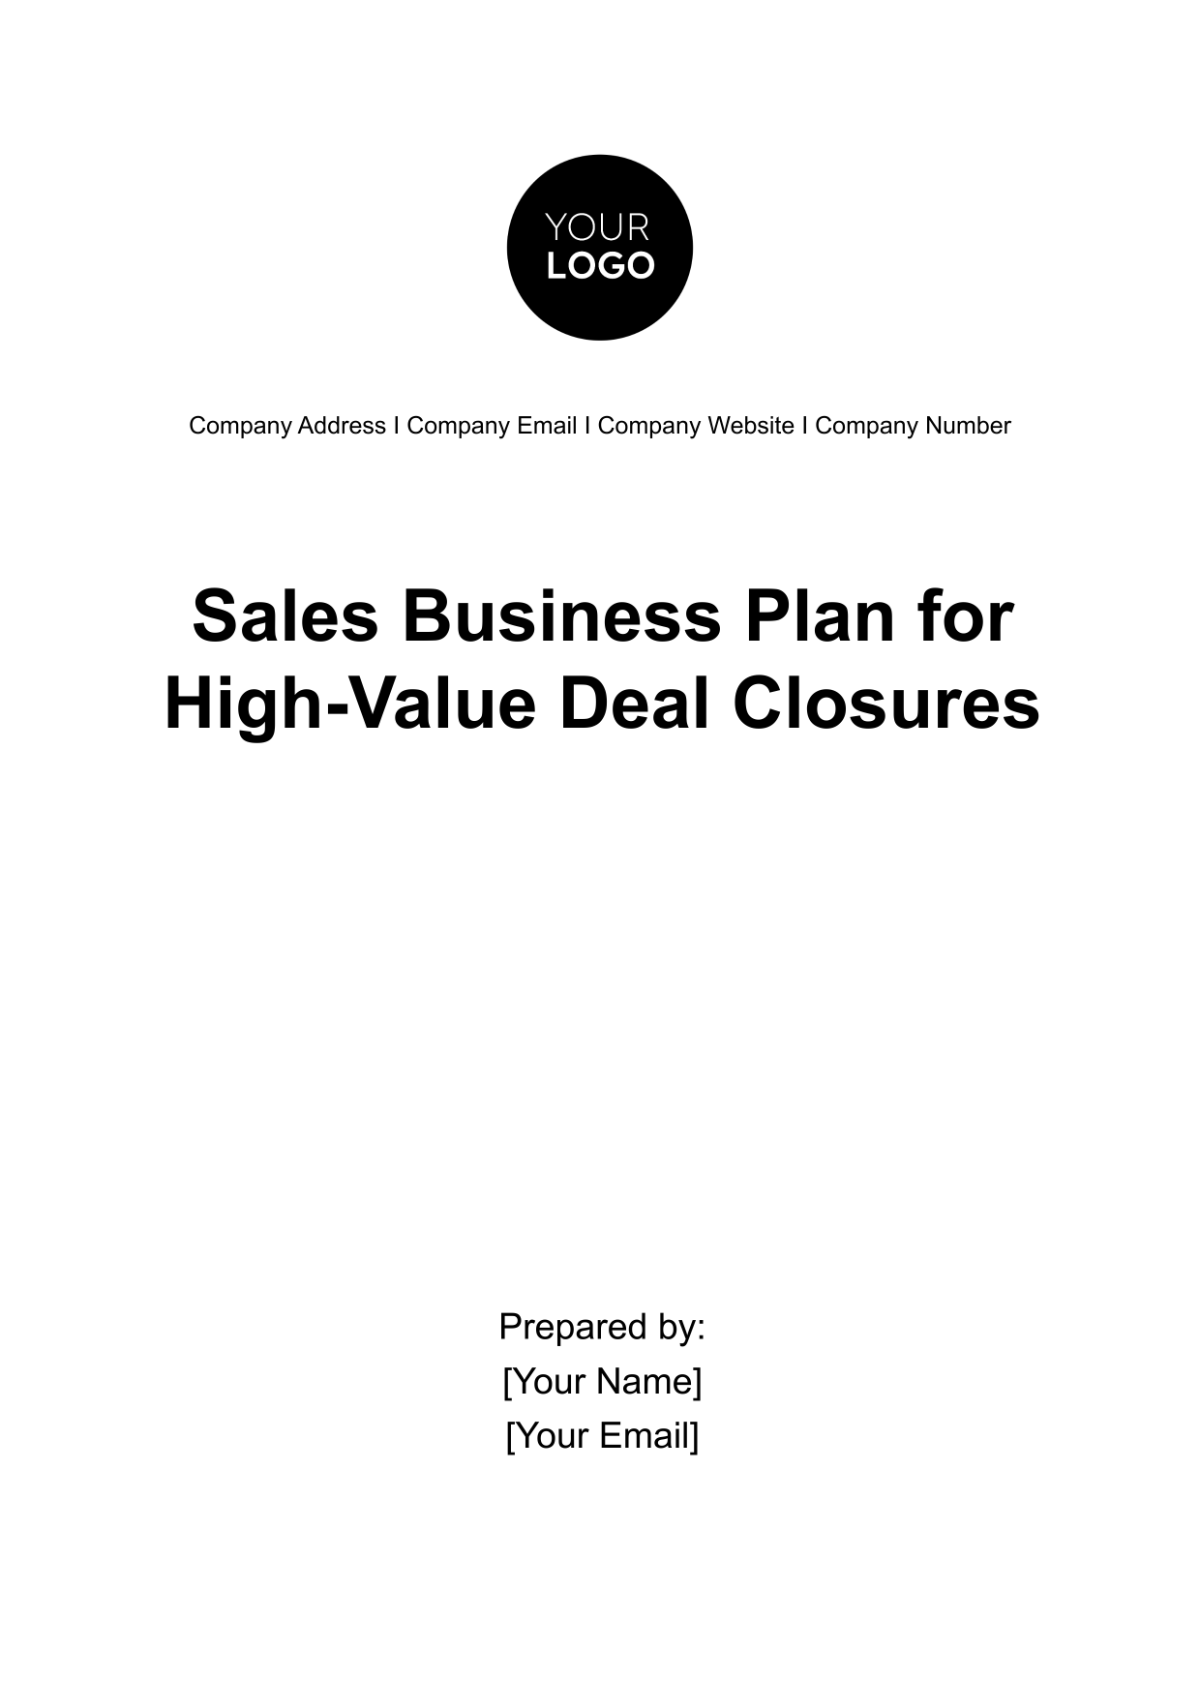 Sales Business Plan for High-Value Deal Closures Template